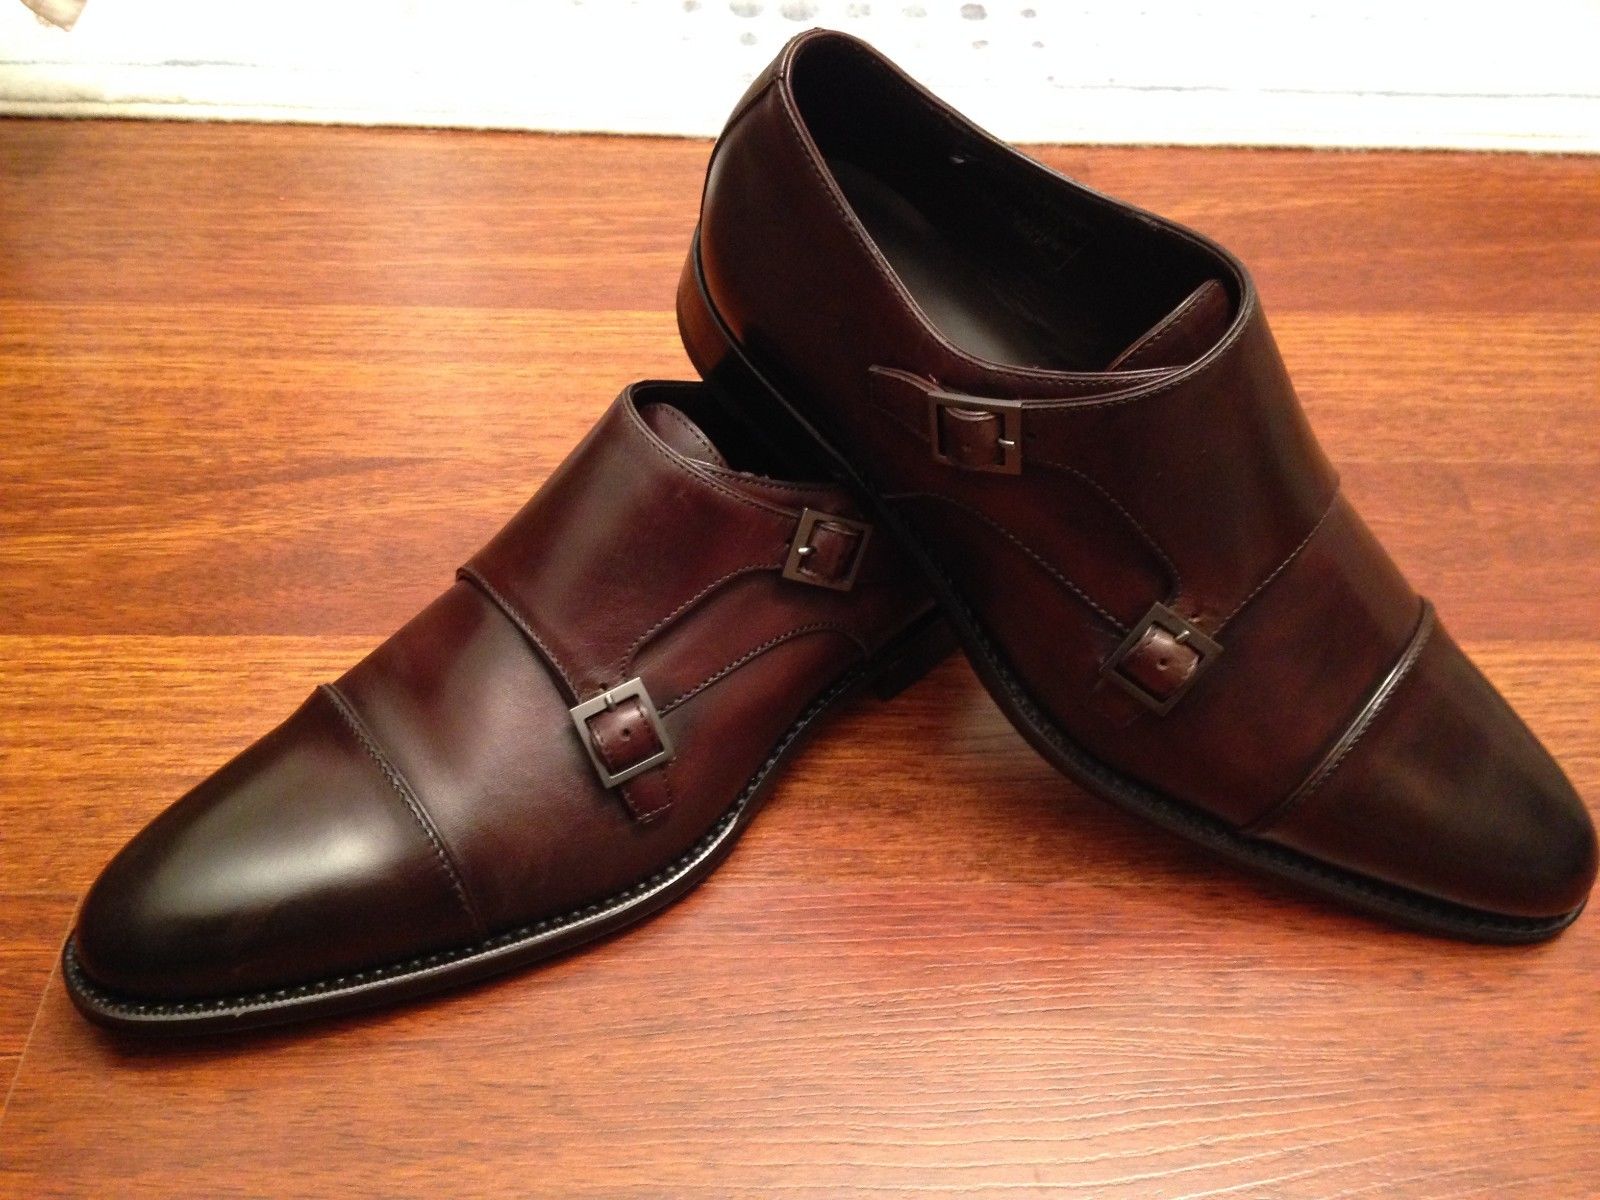 Hugo Boss Selection shoes. What's the opinion on these? | Styleforum